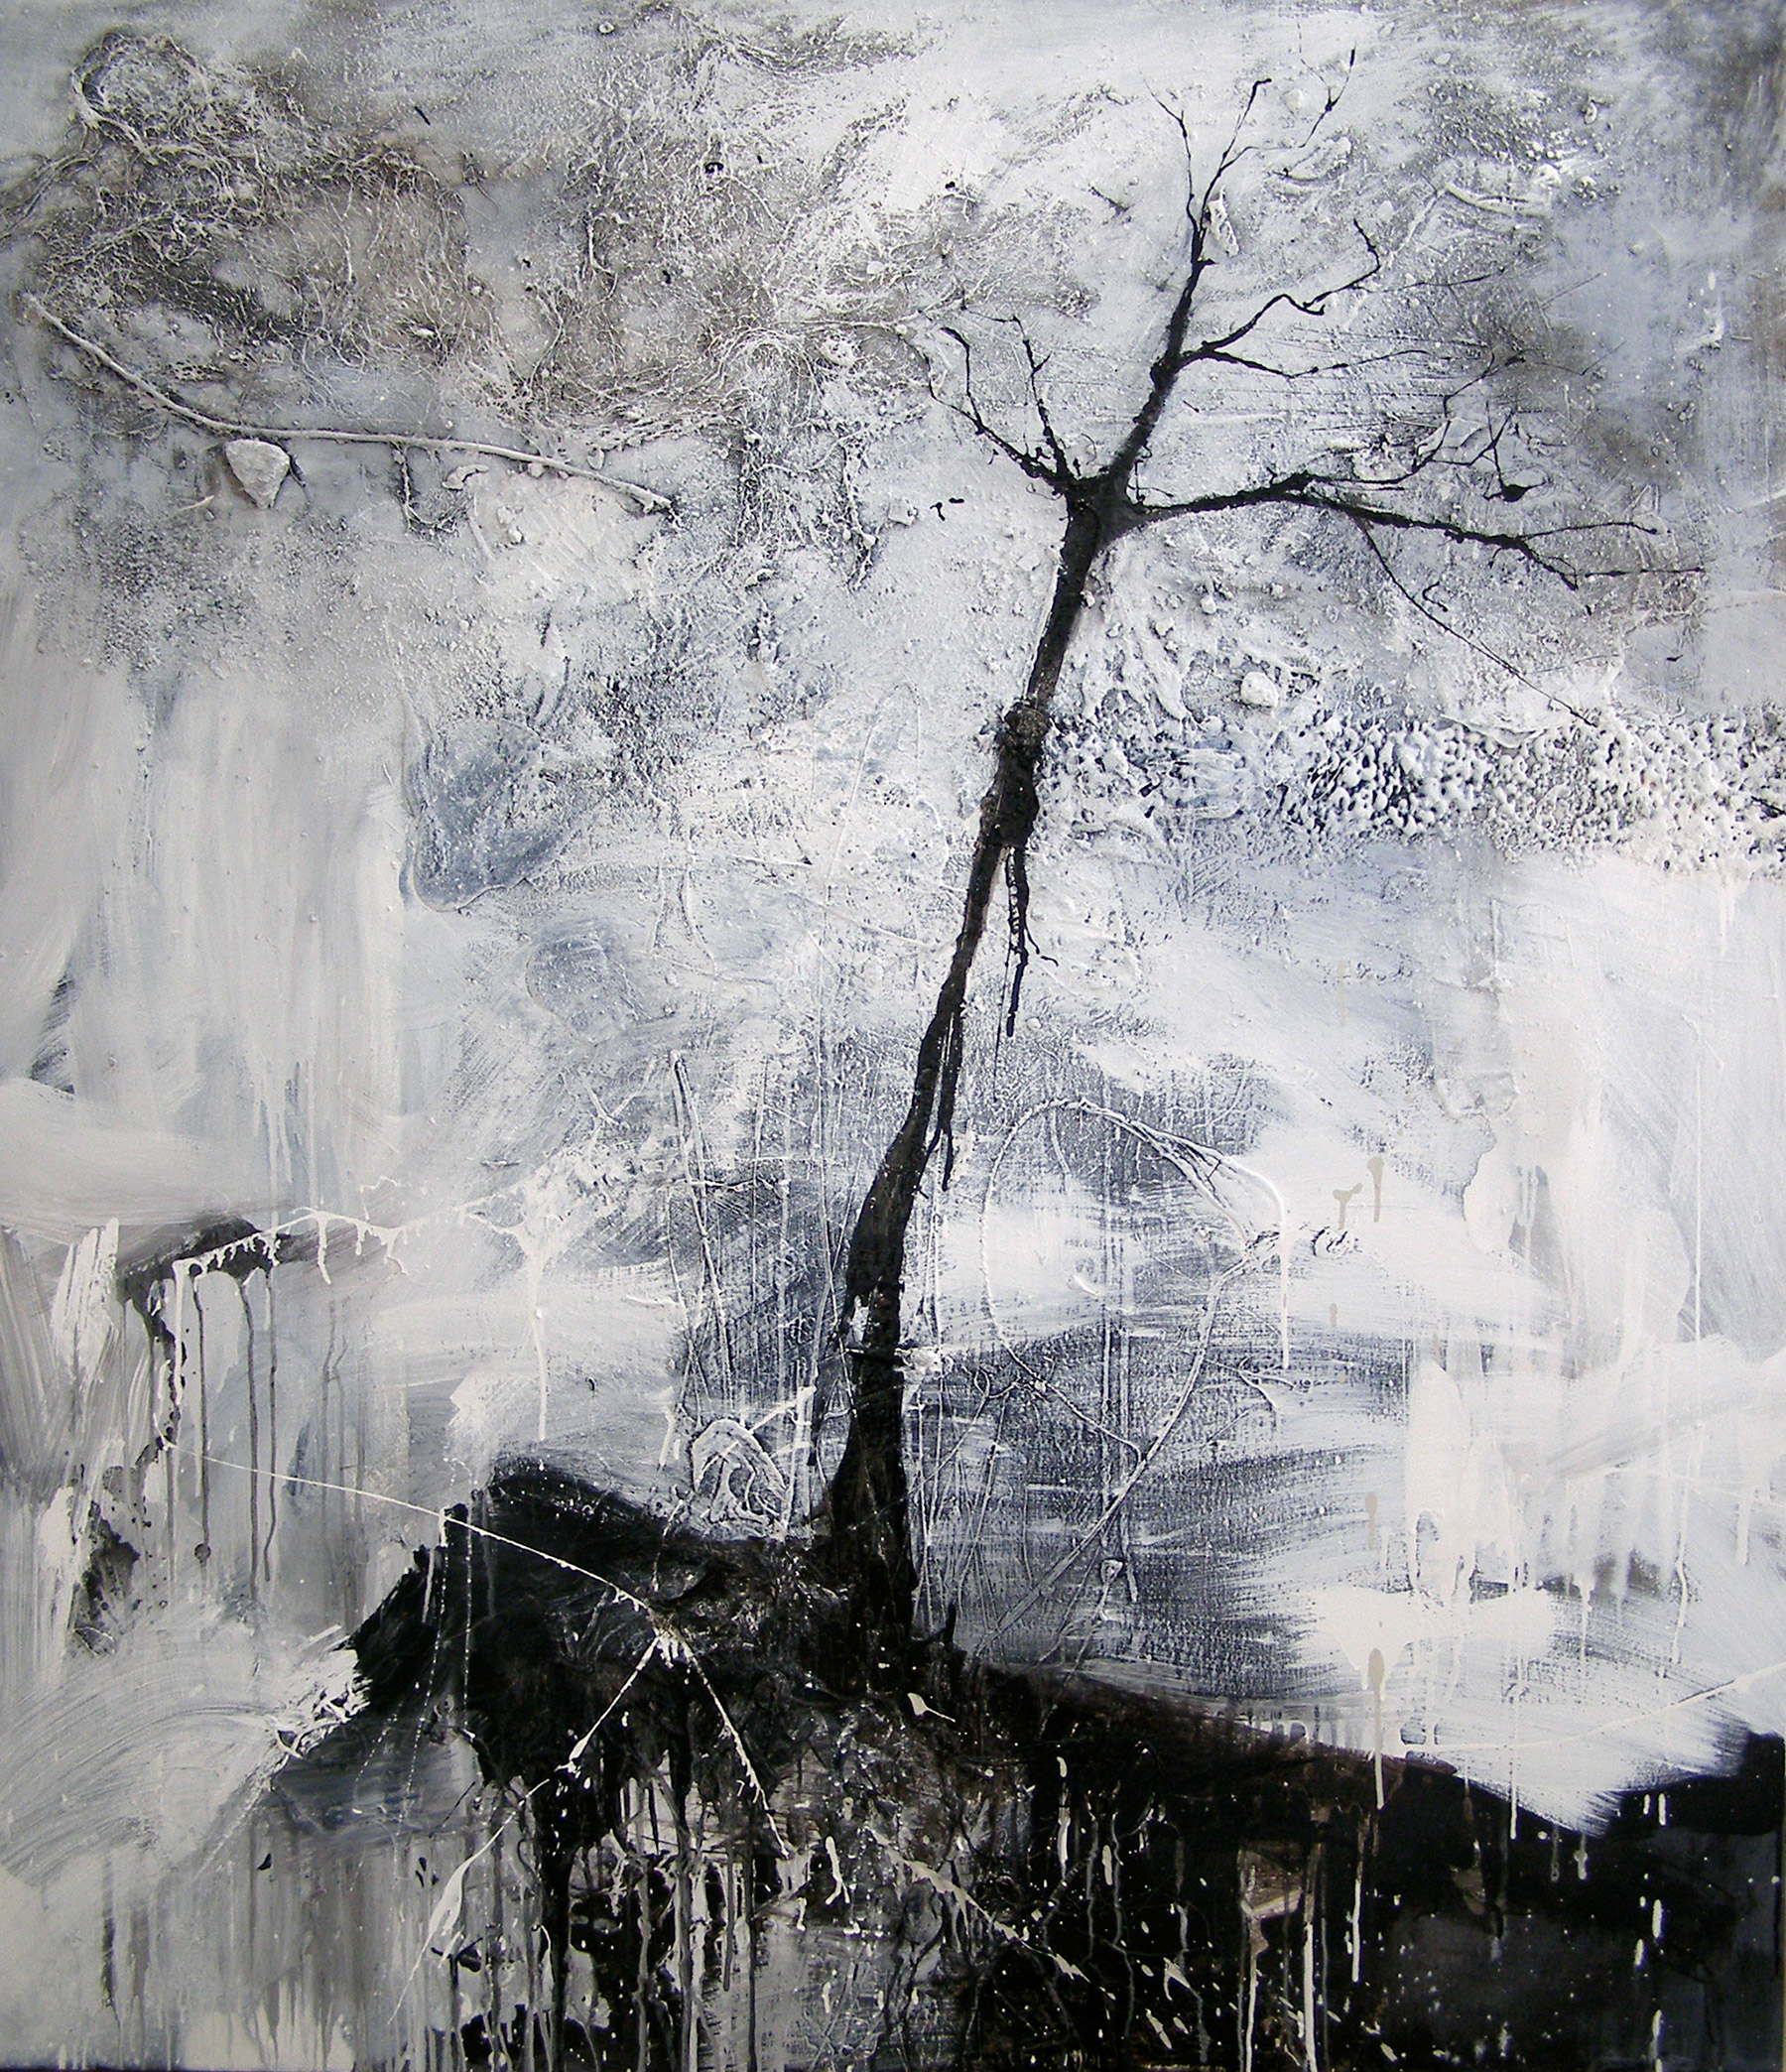 Tree at Night, 150x130cm, Mixed technique on canvas, 2010